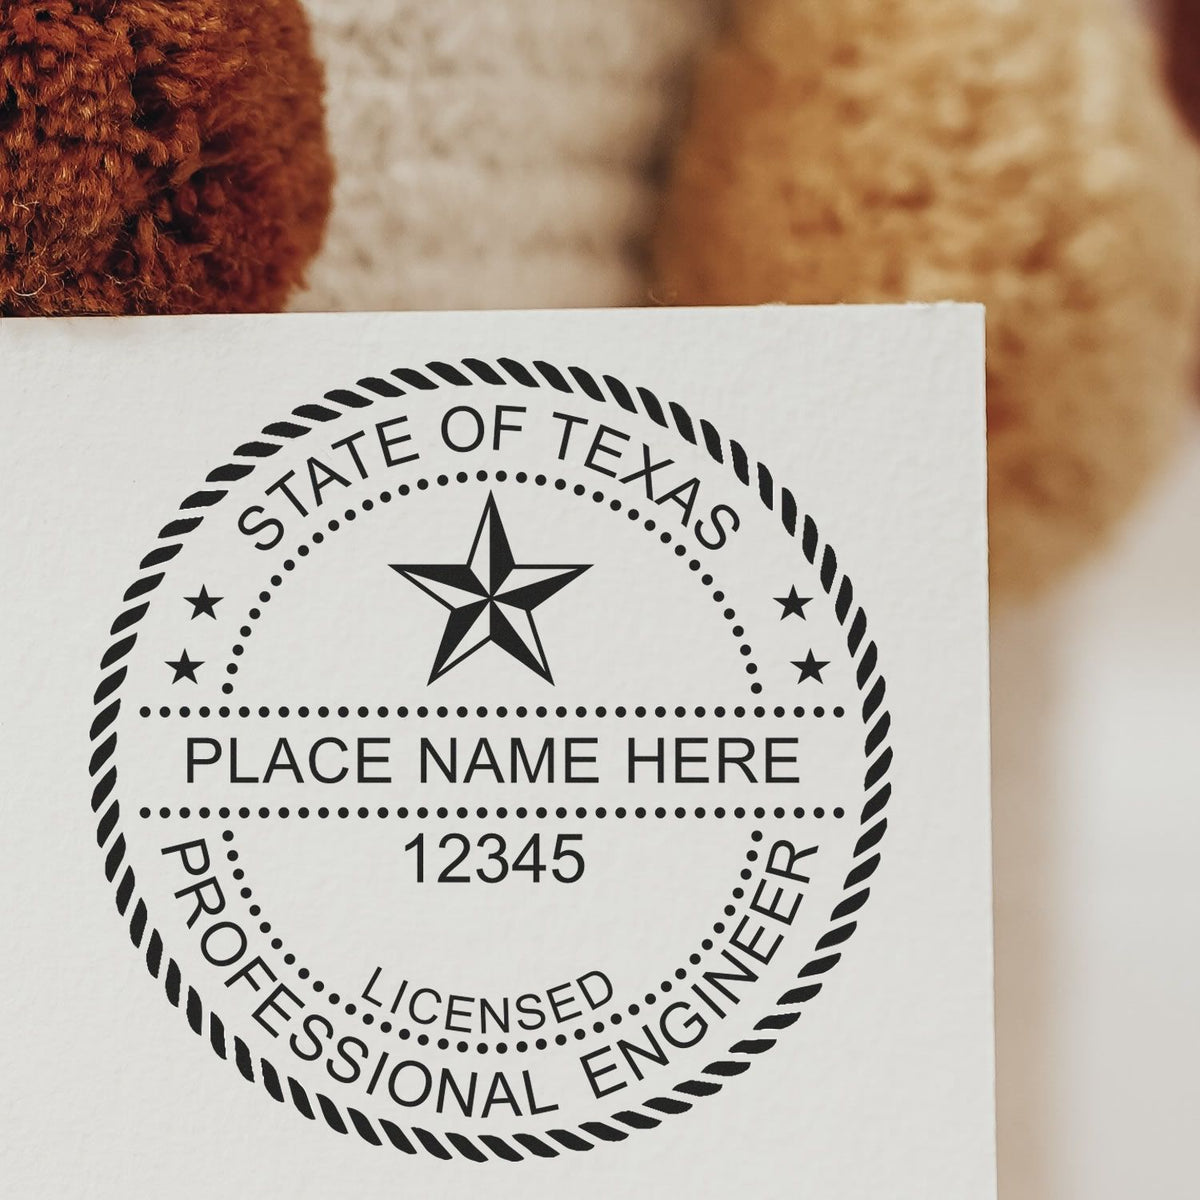 A stamped impression of the Digital Texas PE Stamp and Electronic Seal for Texas Engineer in this stylish lifestyle photo, setting the tone for a unique and personalized product.